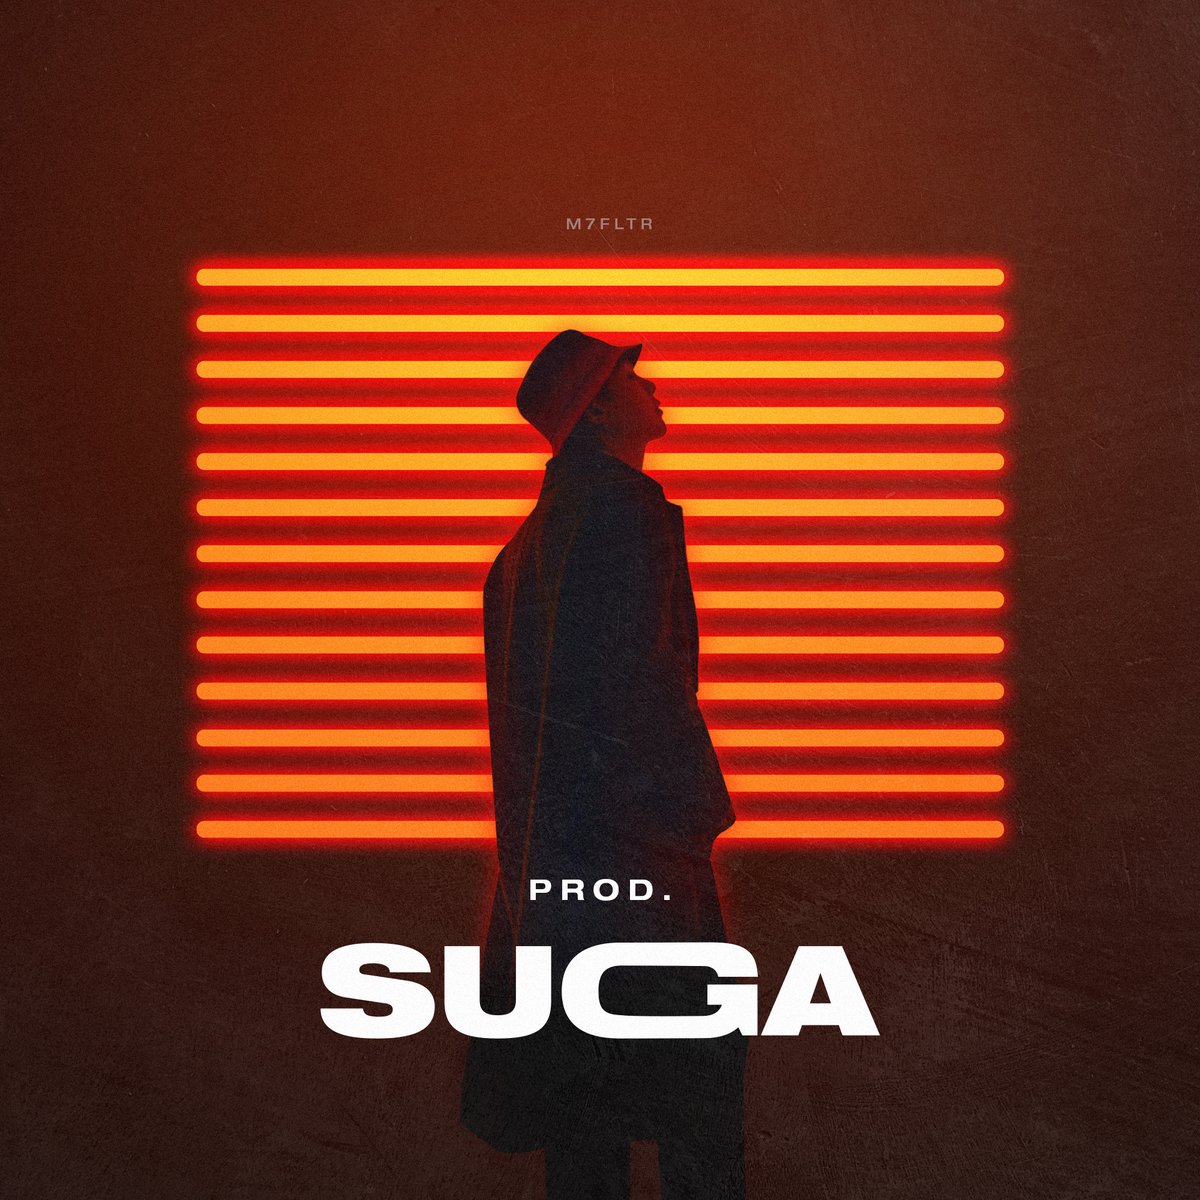 Stay Alive Prod. #SUGA  

ㅡ #7FatesOST COMING 
2022. 02. 05 11AM KST

In appreciation for our genius producer, can't wait for his new creation🧡
#방탄소년단 #BTS #7FATES_CHAKHO 
#착호 #CHAKHO #CHAKHO_Soundtrack #gvfxarmy_edit